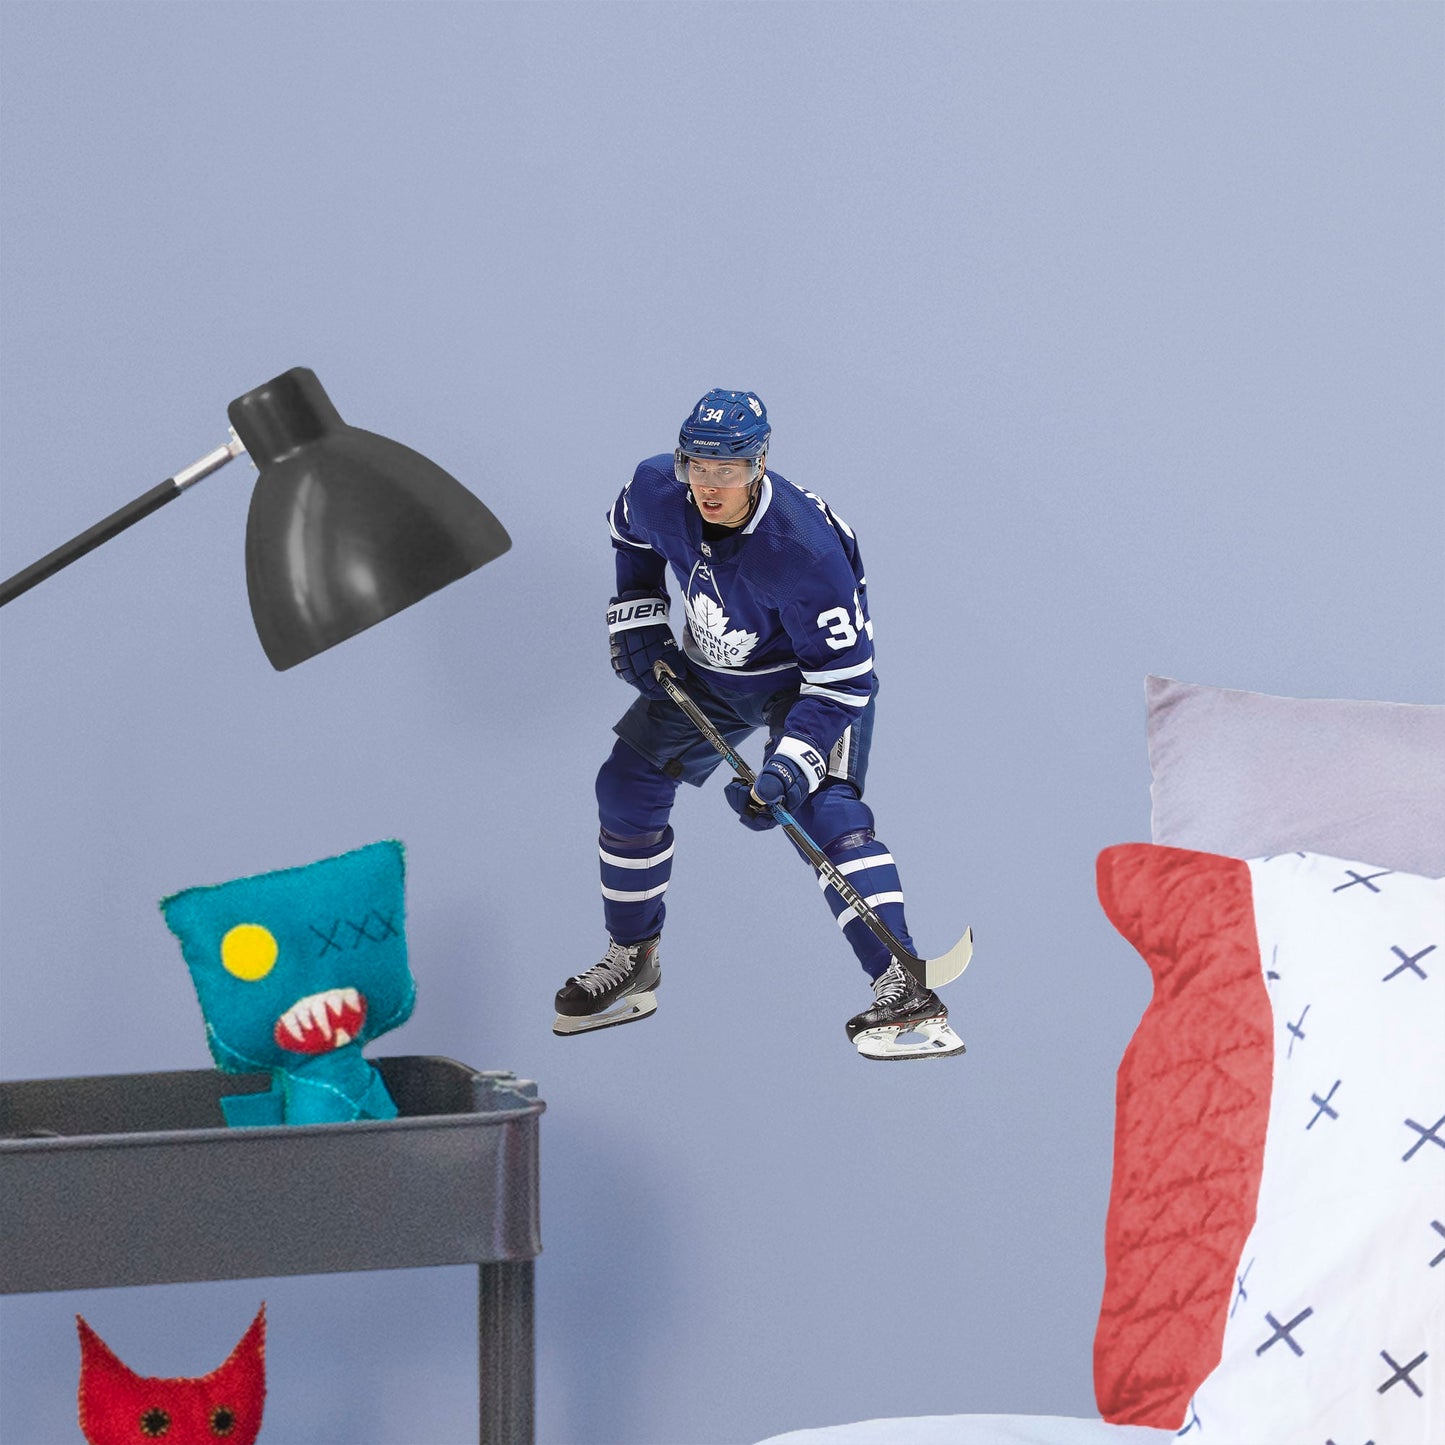 Large Athlete + 2 Decals (10"W x 17"H) He was the first NHL player in modern history to land four goals in his league debut, and now, you can make the Toronto Maple Leafs’ center Auston Matthews part of your bedroom, hallway or game room. Affectionately known as Matty, Austino and Mustache, among other monikers, this durable, tear-resistant NHL wall decal features No. 34 in his navy blue and white Maple Leafs best.